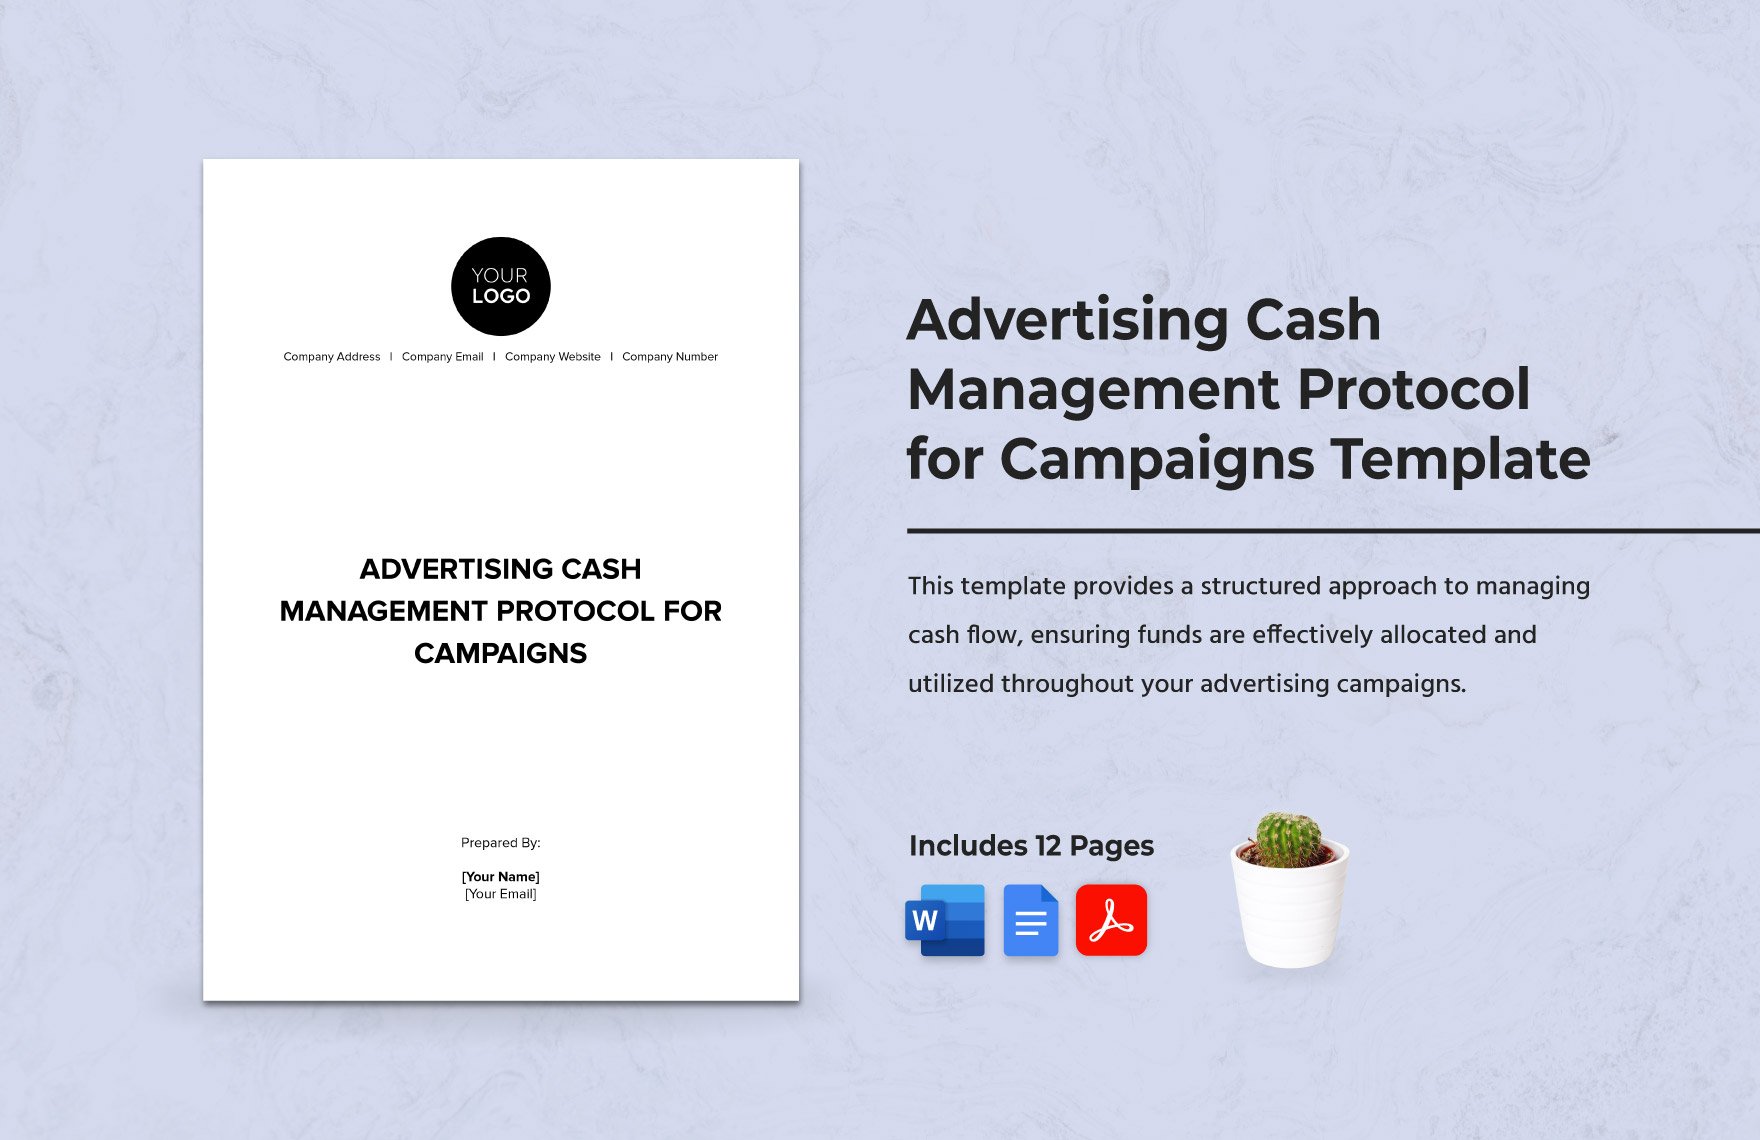 Advertising Cash Management Protocol for Campaigns Template in Word, Google Docs, PDF